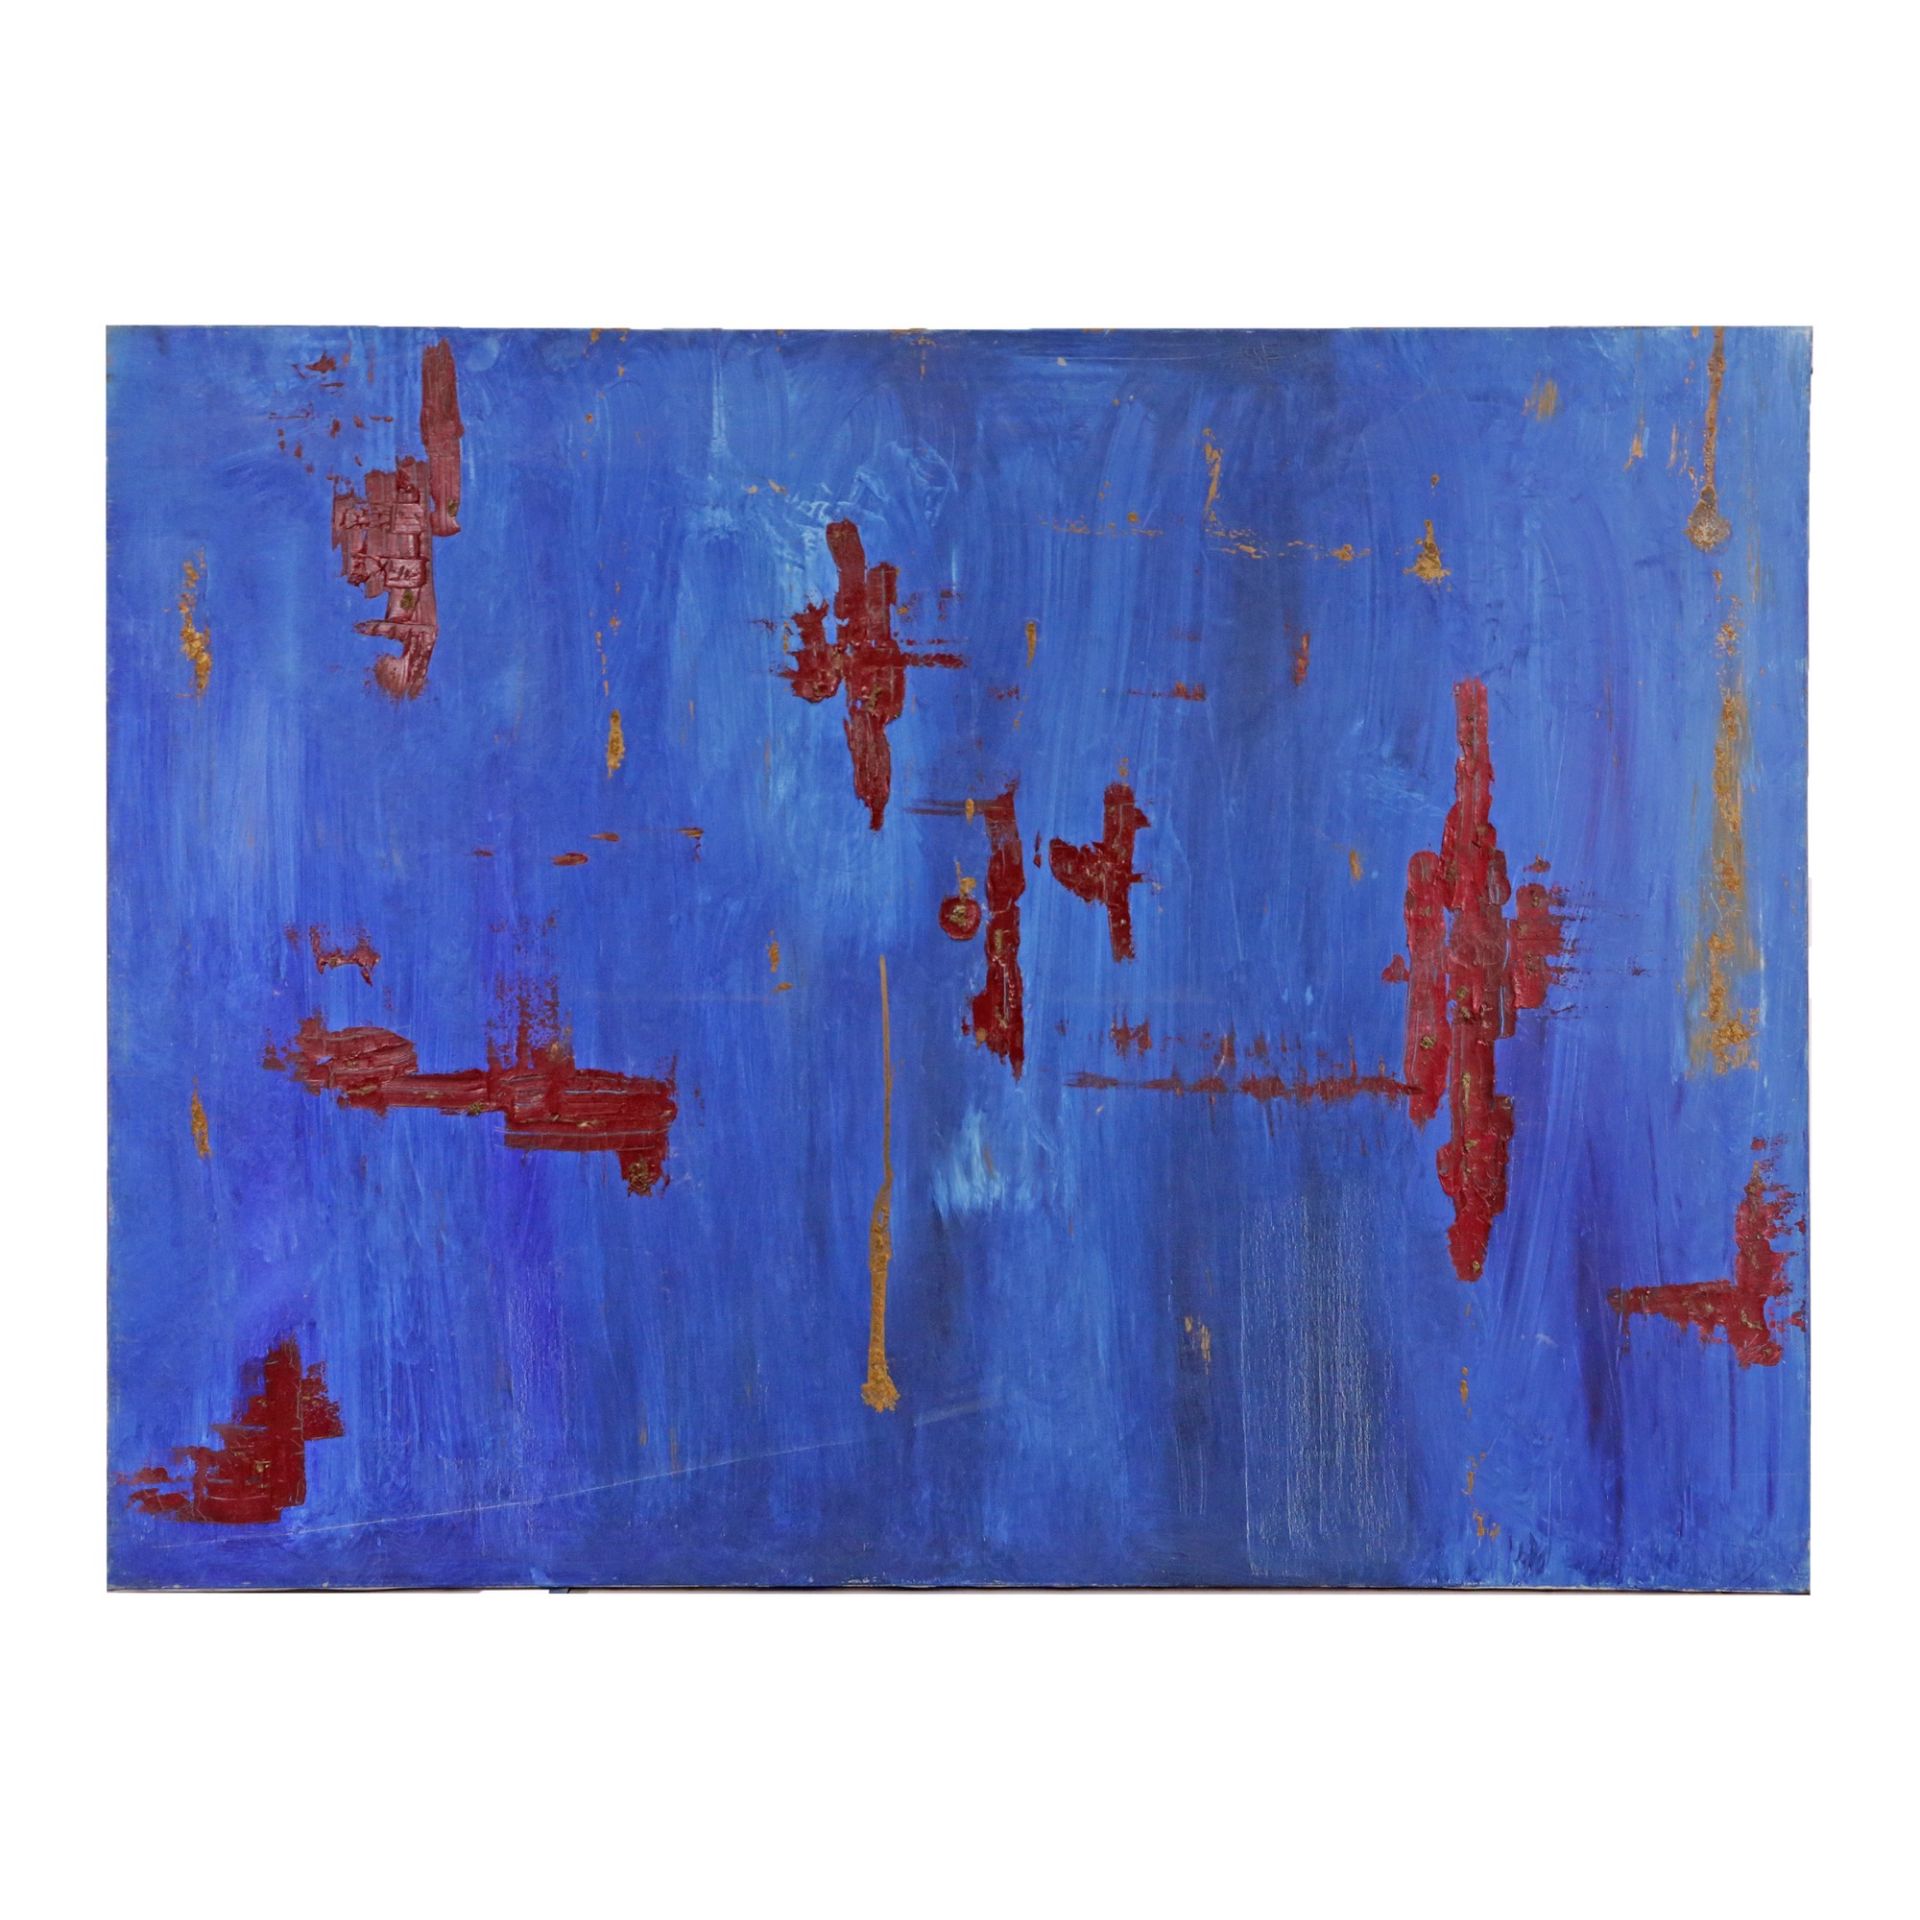 "Red abstraction on blue", oil on canvas, 20th century abstract painting.